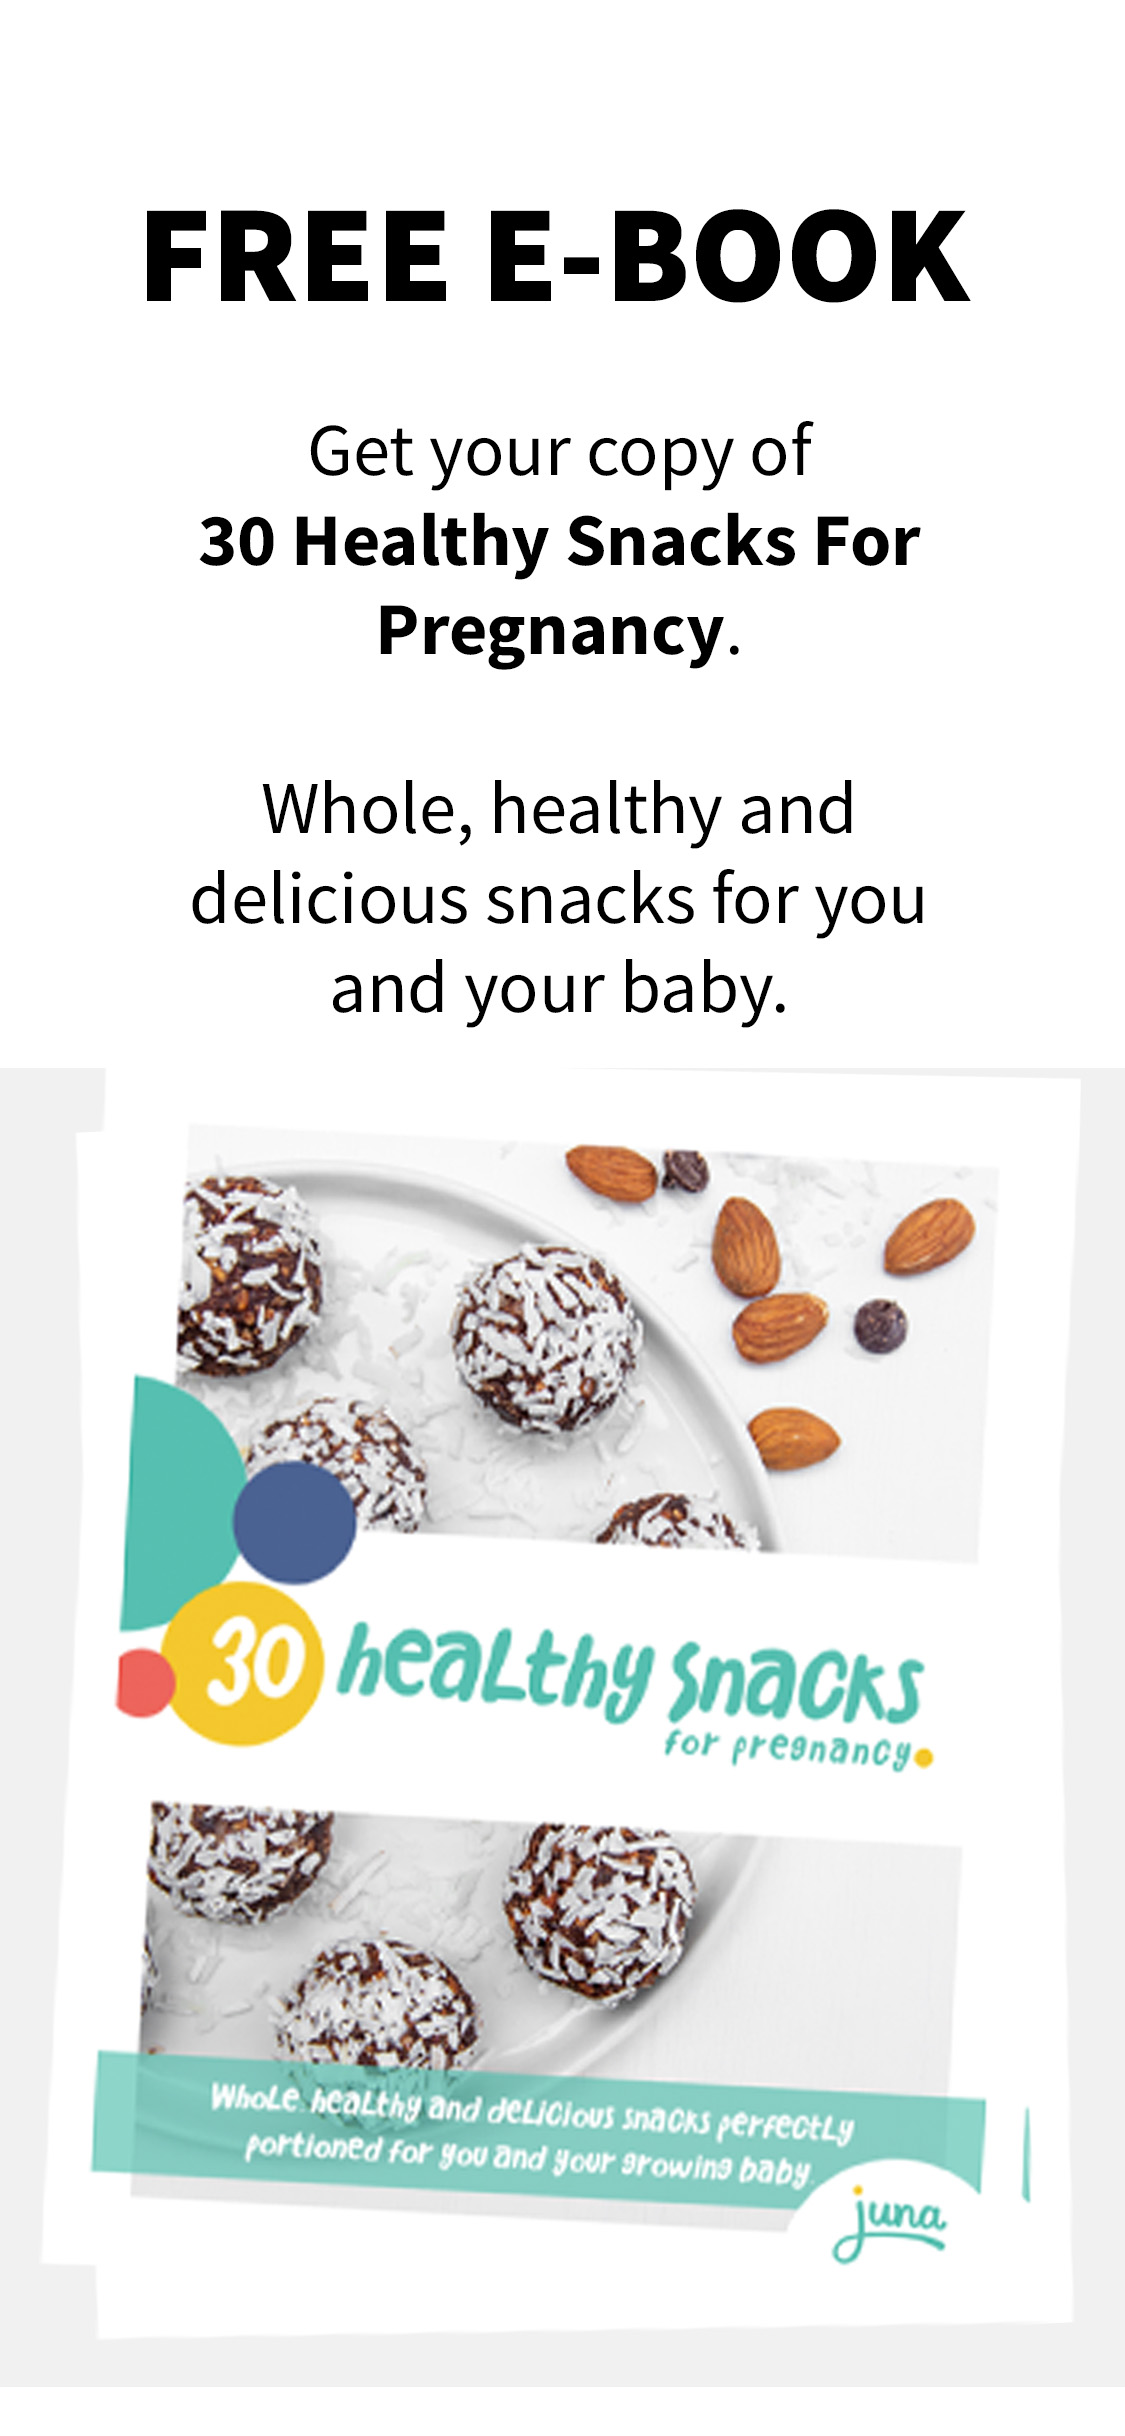 Please subscribe to the Juna Women Podcast wherever you listen to Podcasts. If you have feedback or know someone who would be a great guest on the show, please reach to Sarah@juna.co. For more from Juna, please enter your e-mail below to receive our FREE E-book, 30 Healthy Snacks For Pregnancy